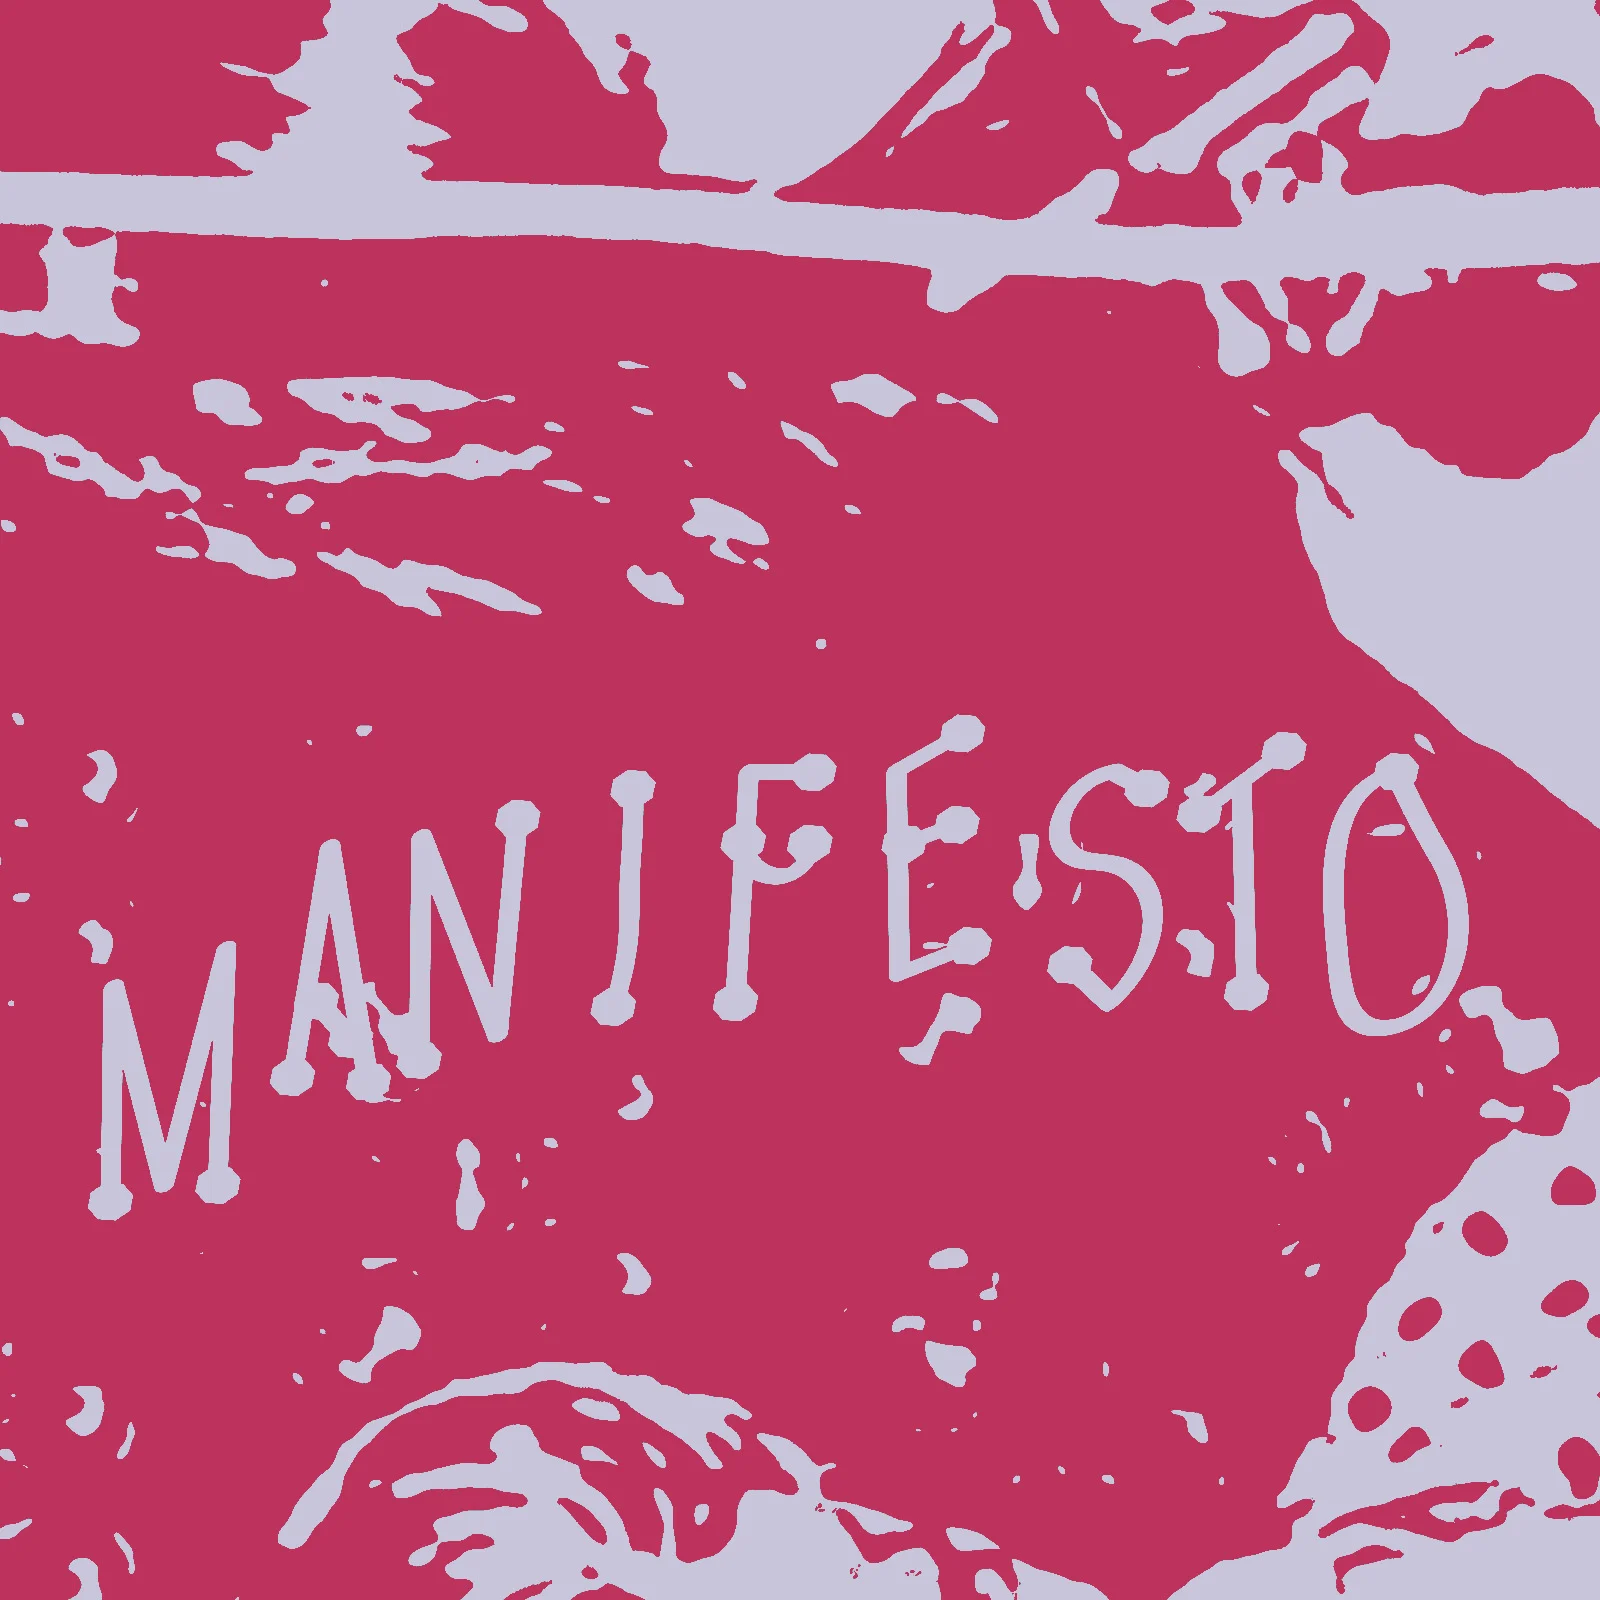 A manifesto by The Raincoats